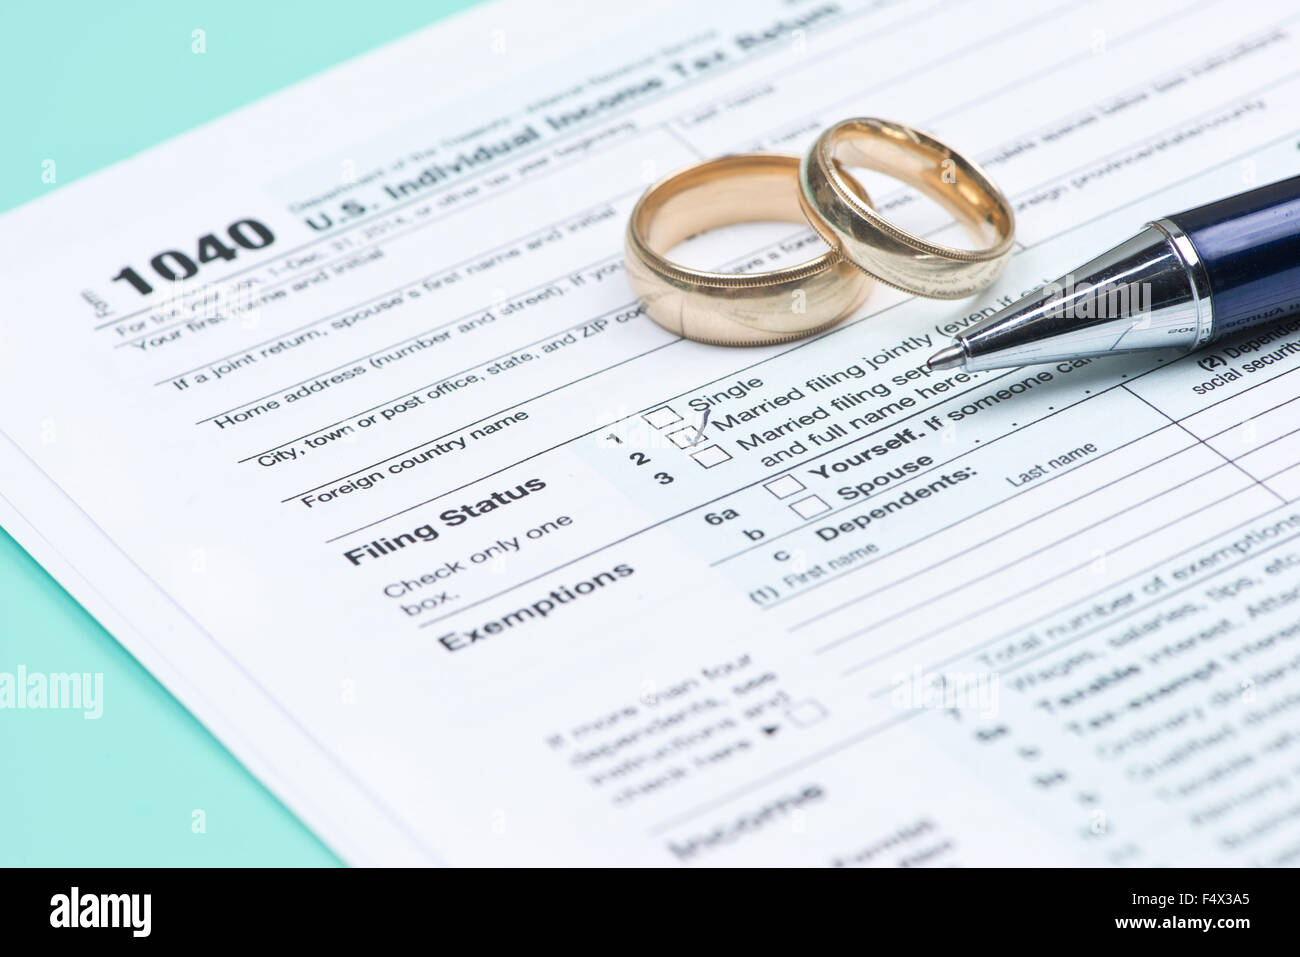 Wedding rings with United States tax form 1040 and pen. Stock Photo